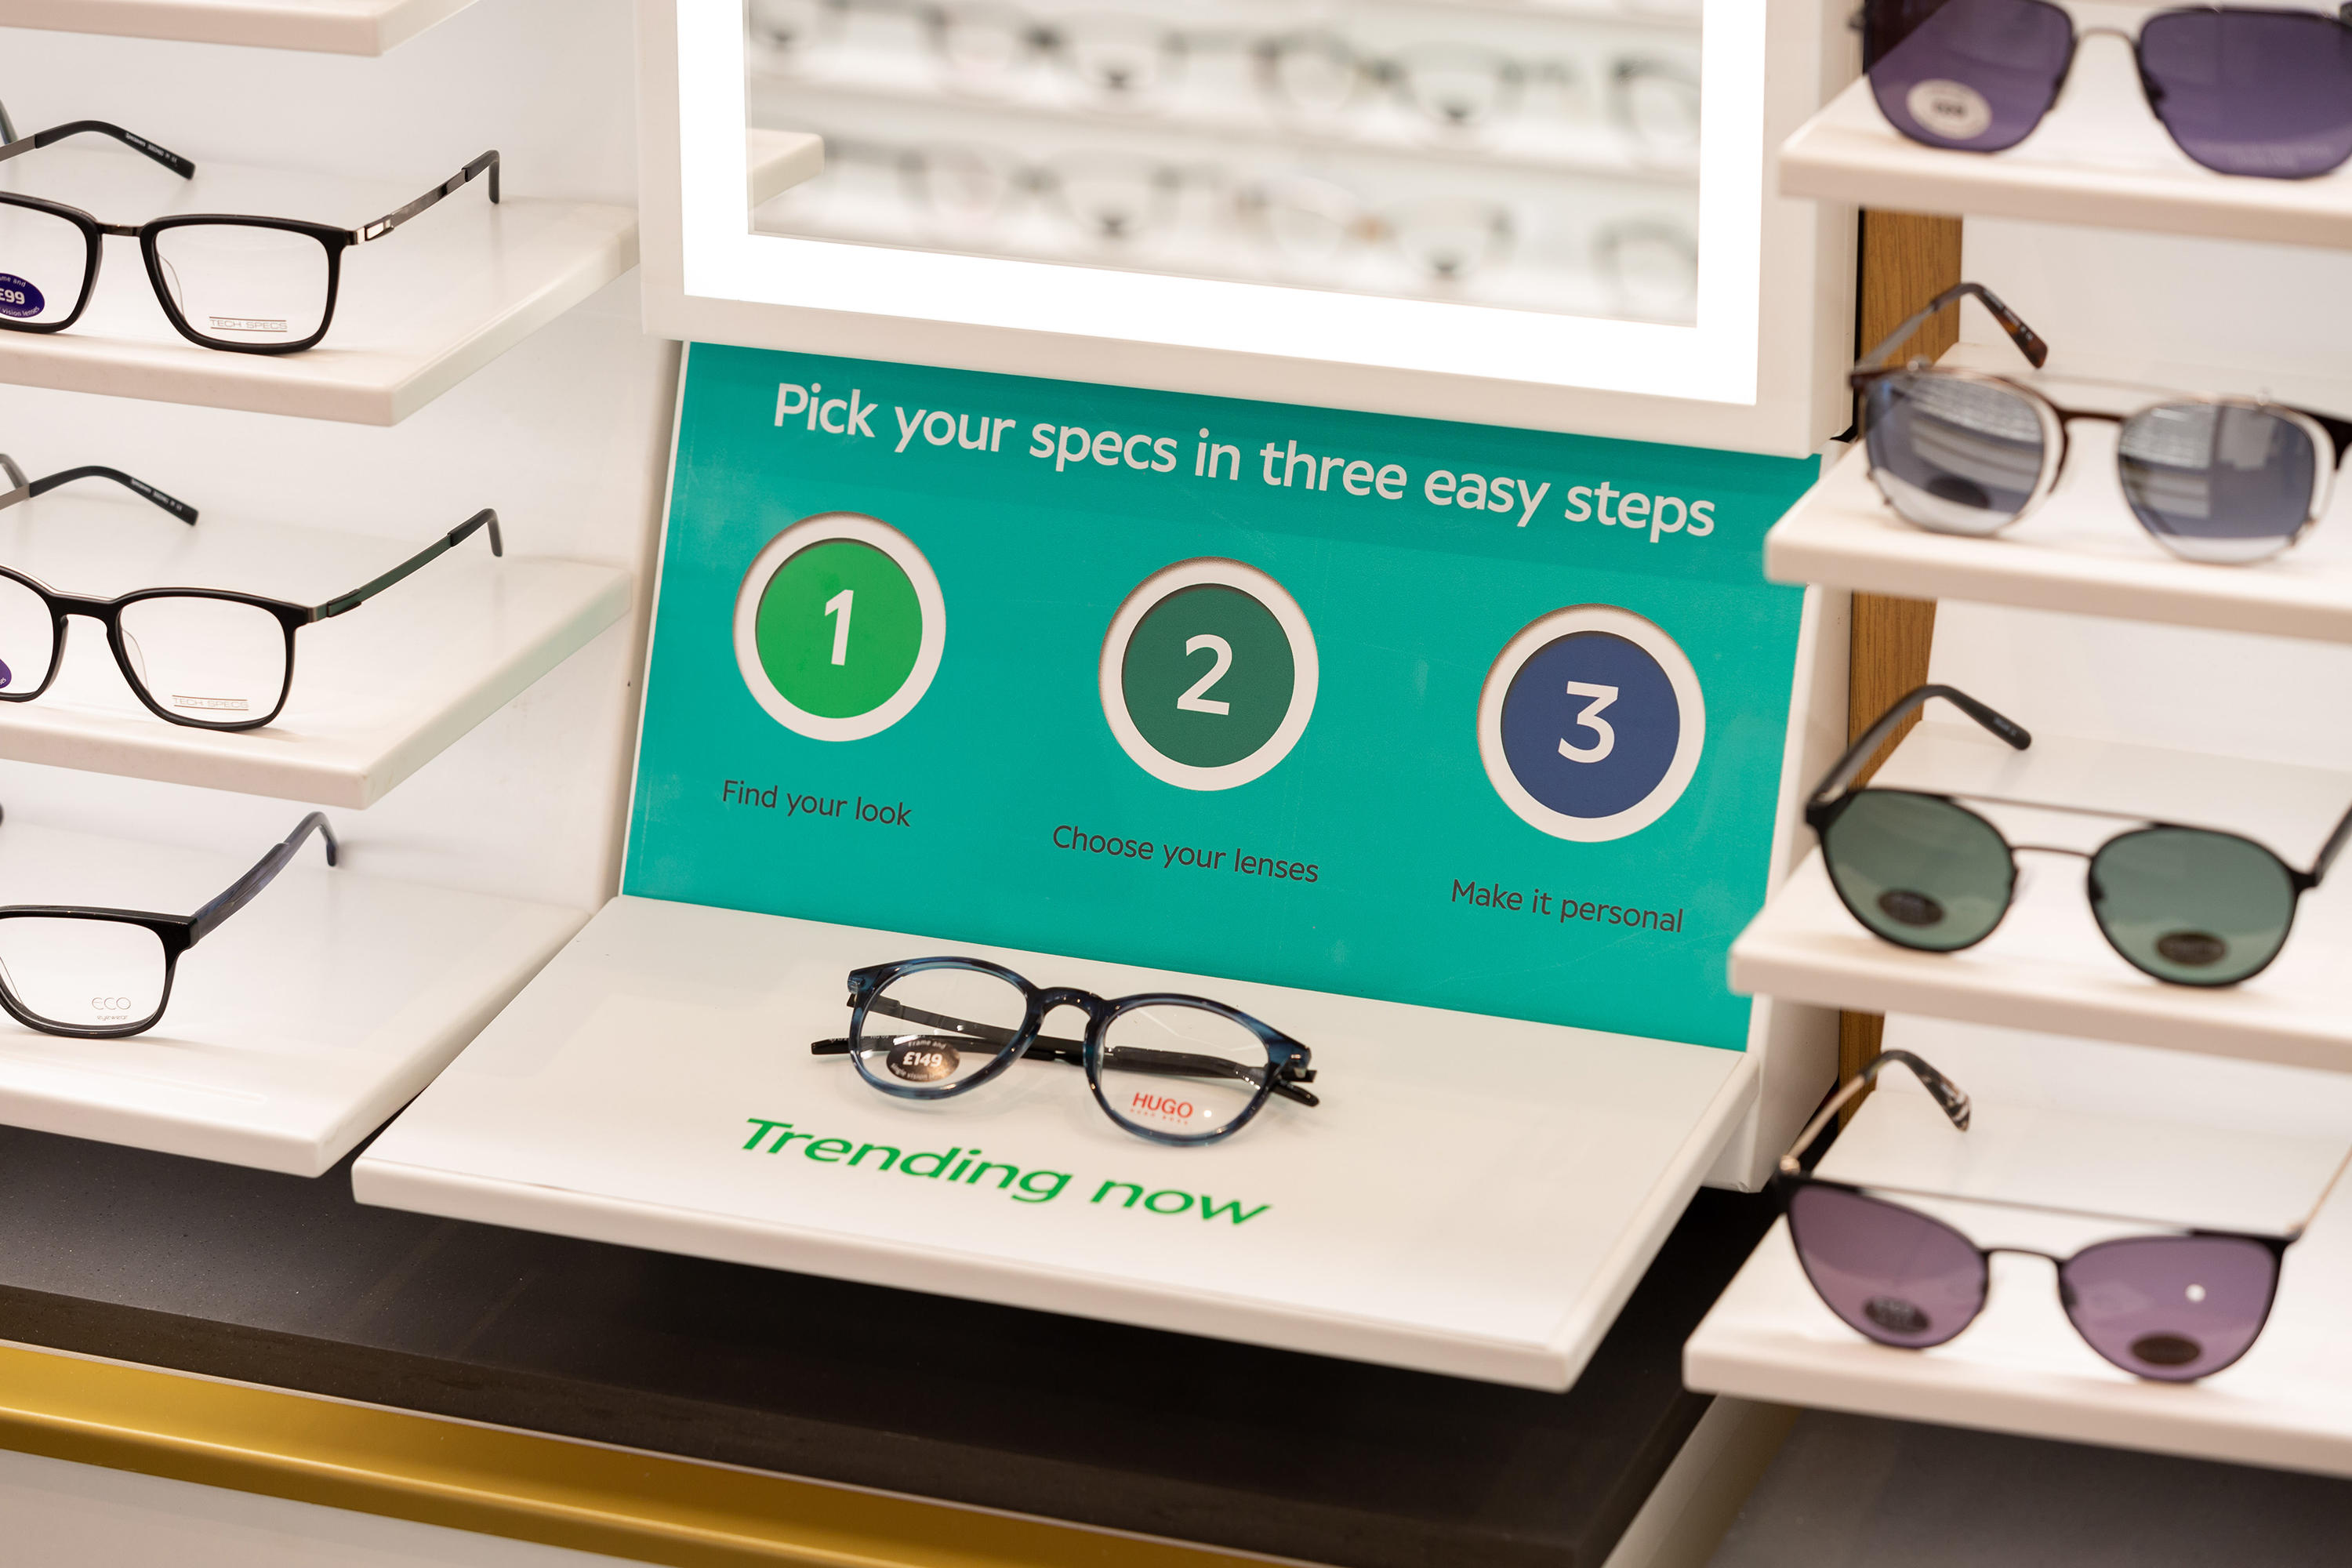 Specsavers Dudley Specsavers Opticians and Audiologists - Dudley Dudley 01384 214851